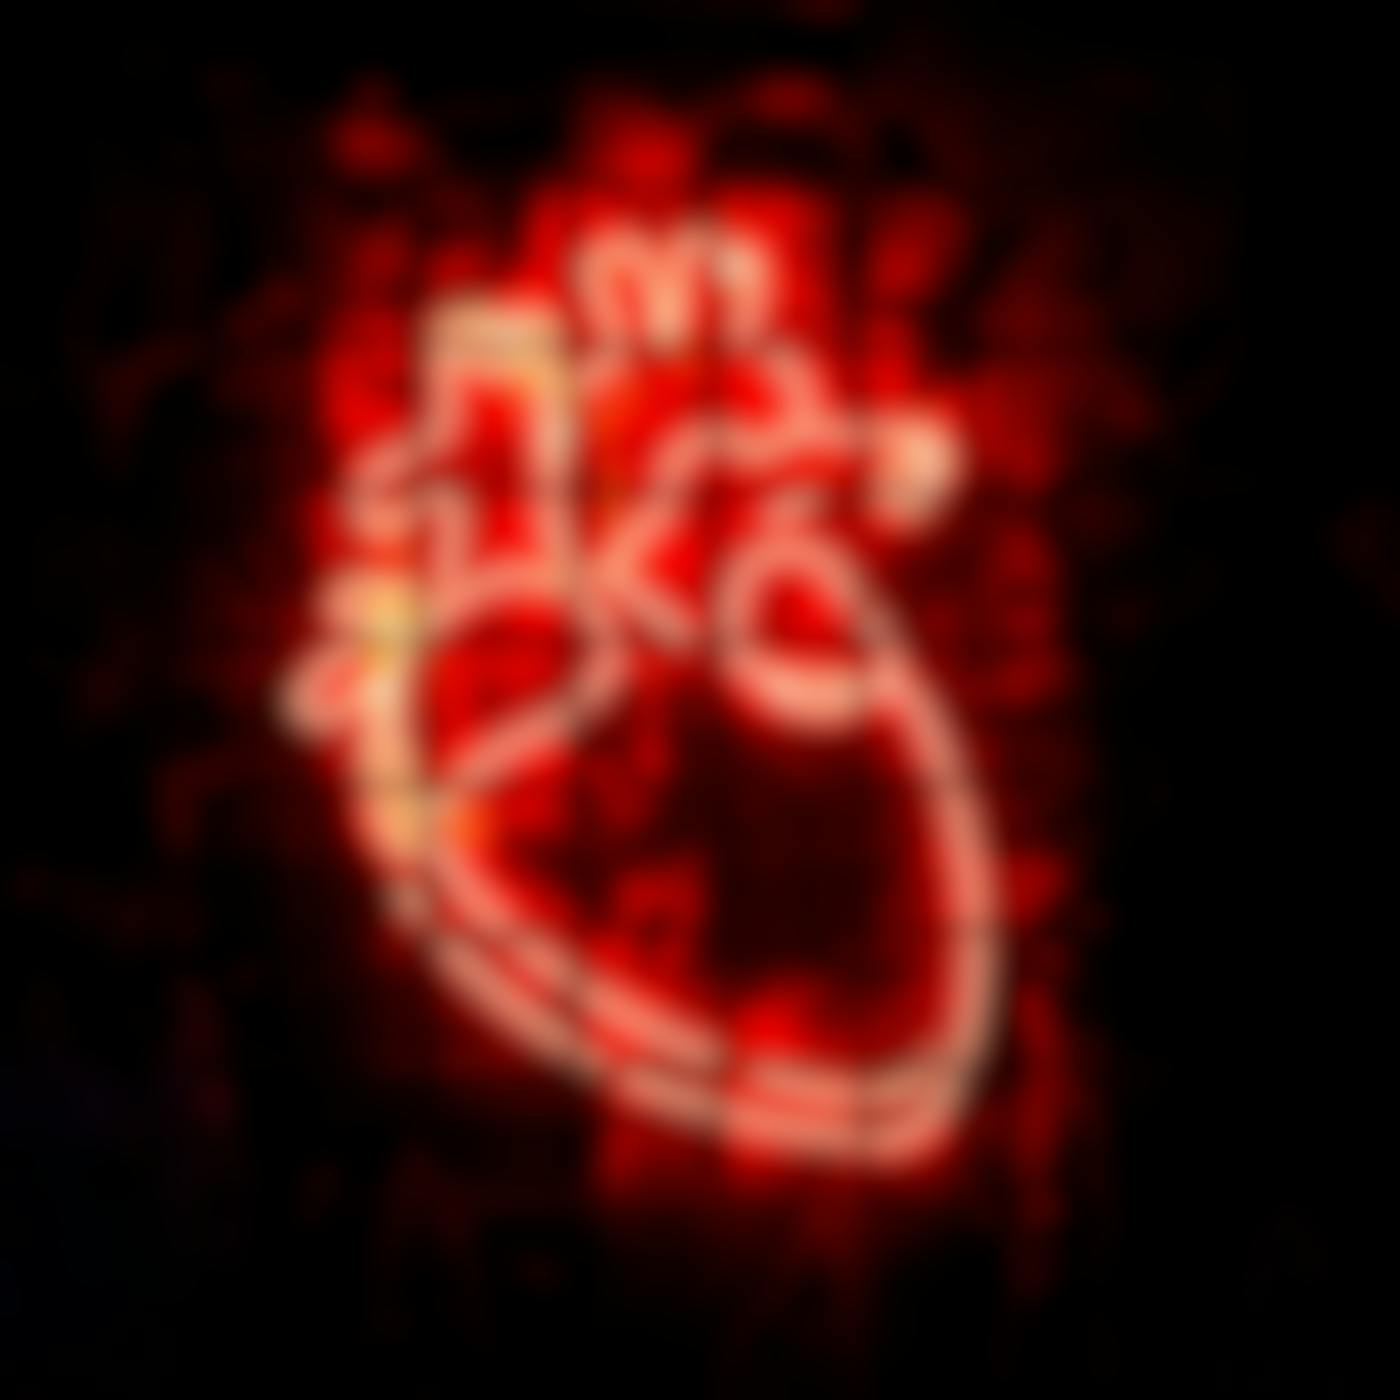 An outline of a human heart in red neon in a cage